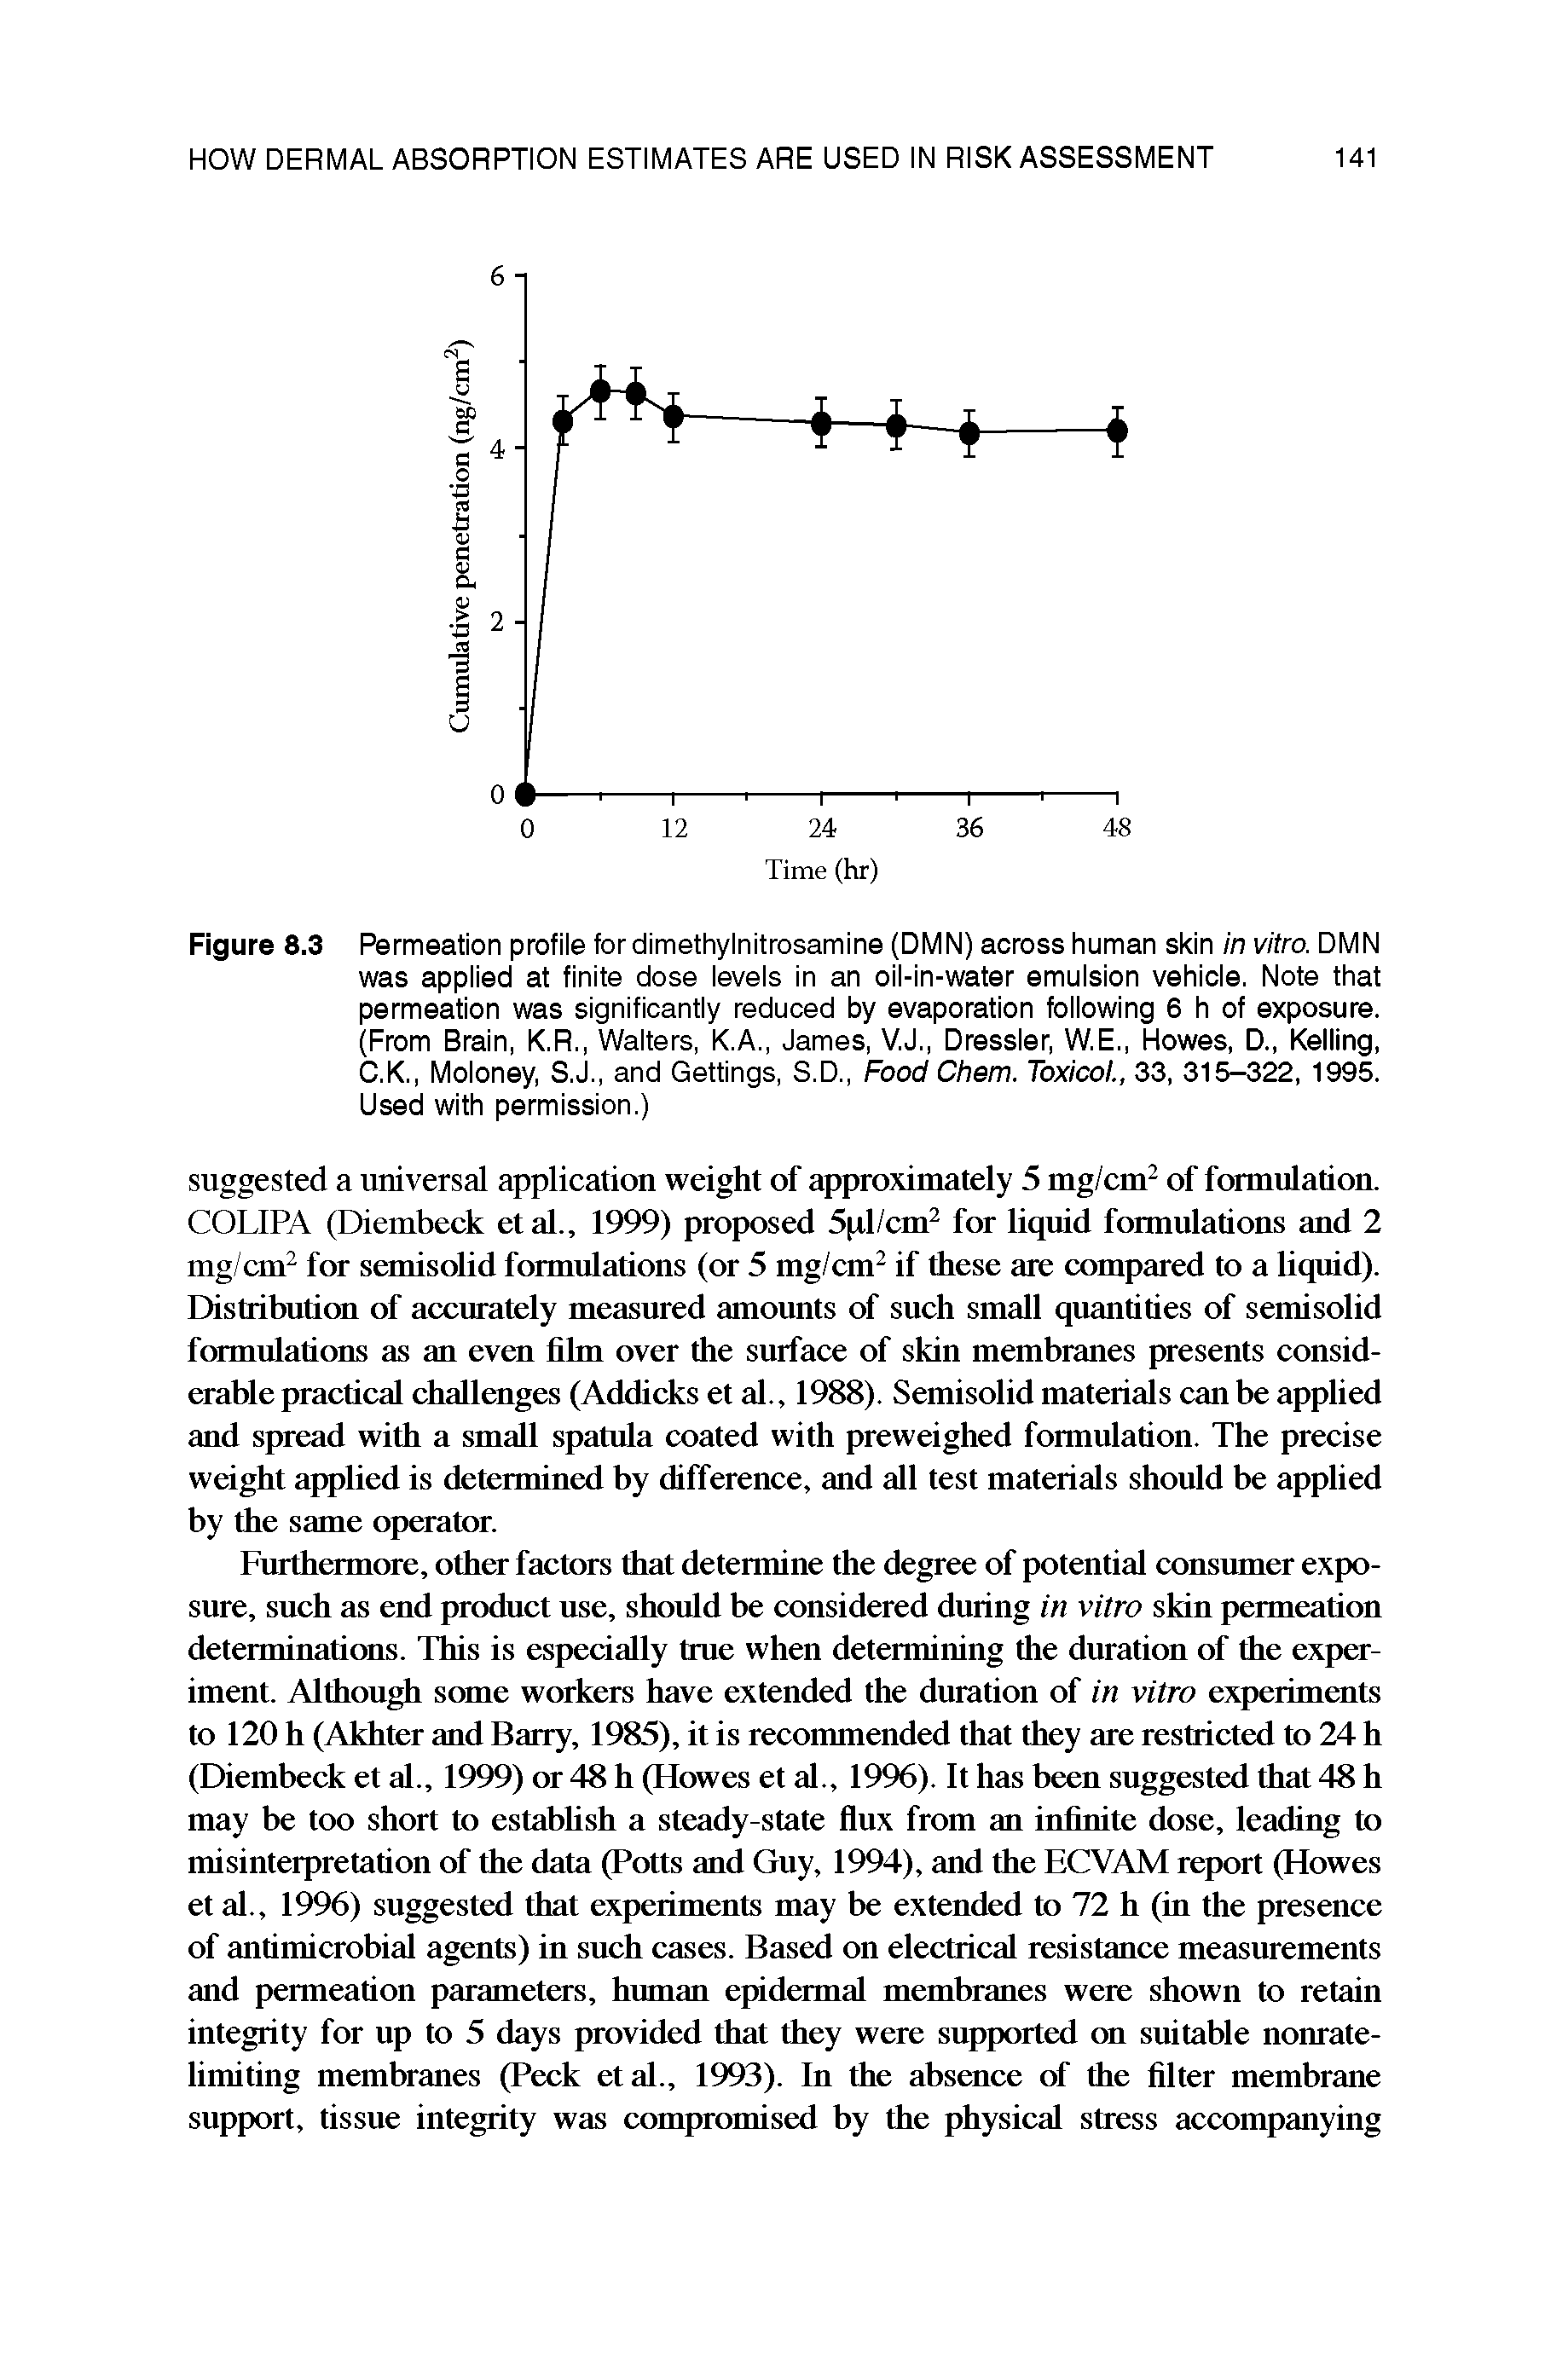 Figure 8.3 Permeation profile for dimethyinitrosamine (DMN) across human skin in vitro. DMN was applied at finite dose levels in an oil-in-water emulsion vehicle. Note that permeation was significantly reduced by evaporation following 6 h of exposure. (From Brain, K.R., Walters, K.A., James, V.J., Dressier, W.E., Howes, D., Kelling, C.K., Moloney, S.J., and Gettings, S.D., Food Chem. Toxicol., 33, 315-322, 1995. Used with permission.)...